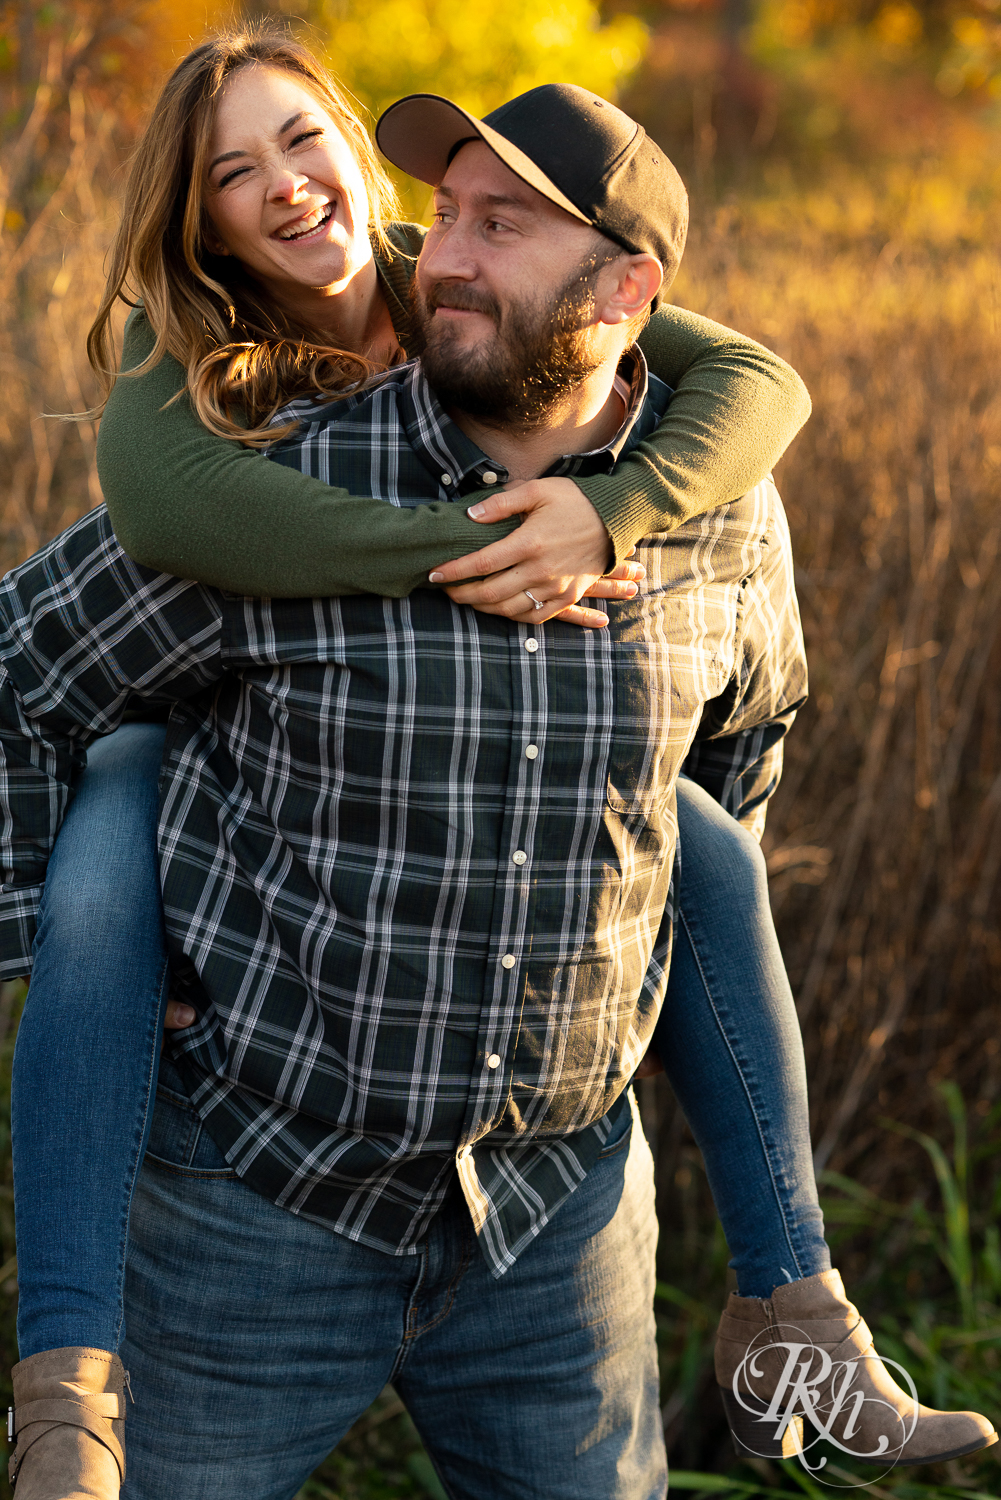 Man in flannel giving woman in jeans and sweater a piggyback ride during sunset in Eagan, Minnesota.